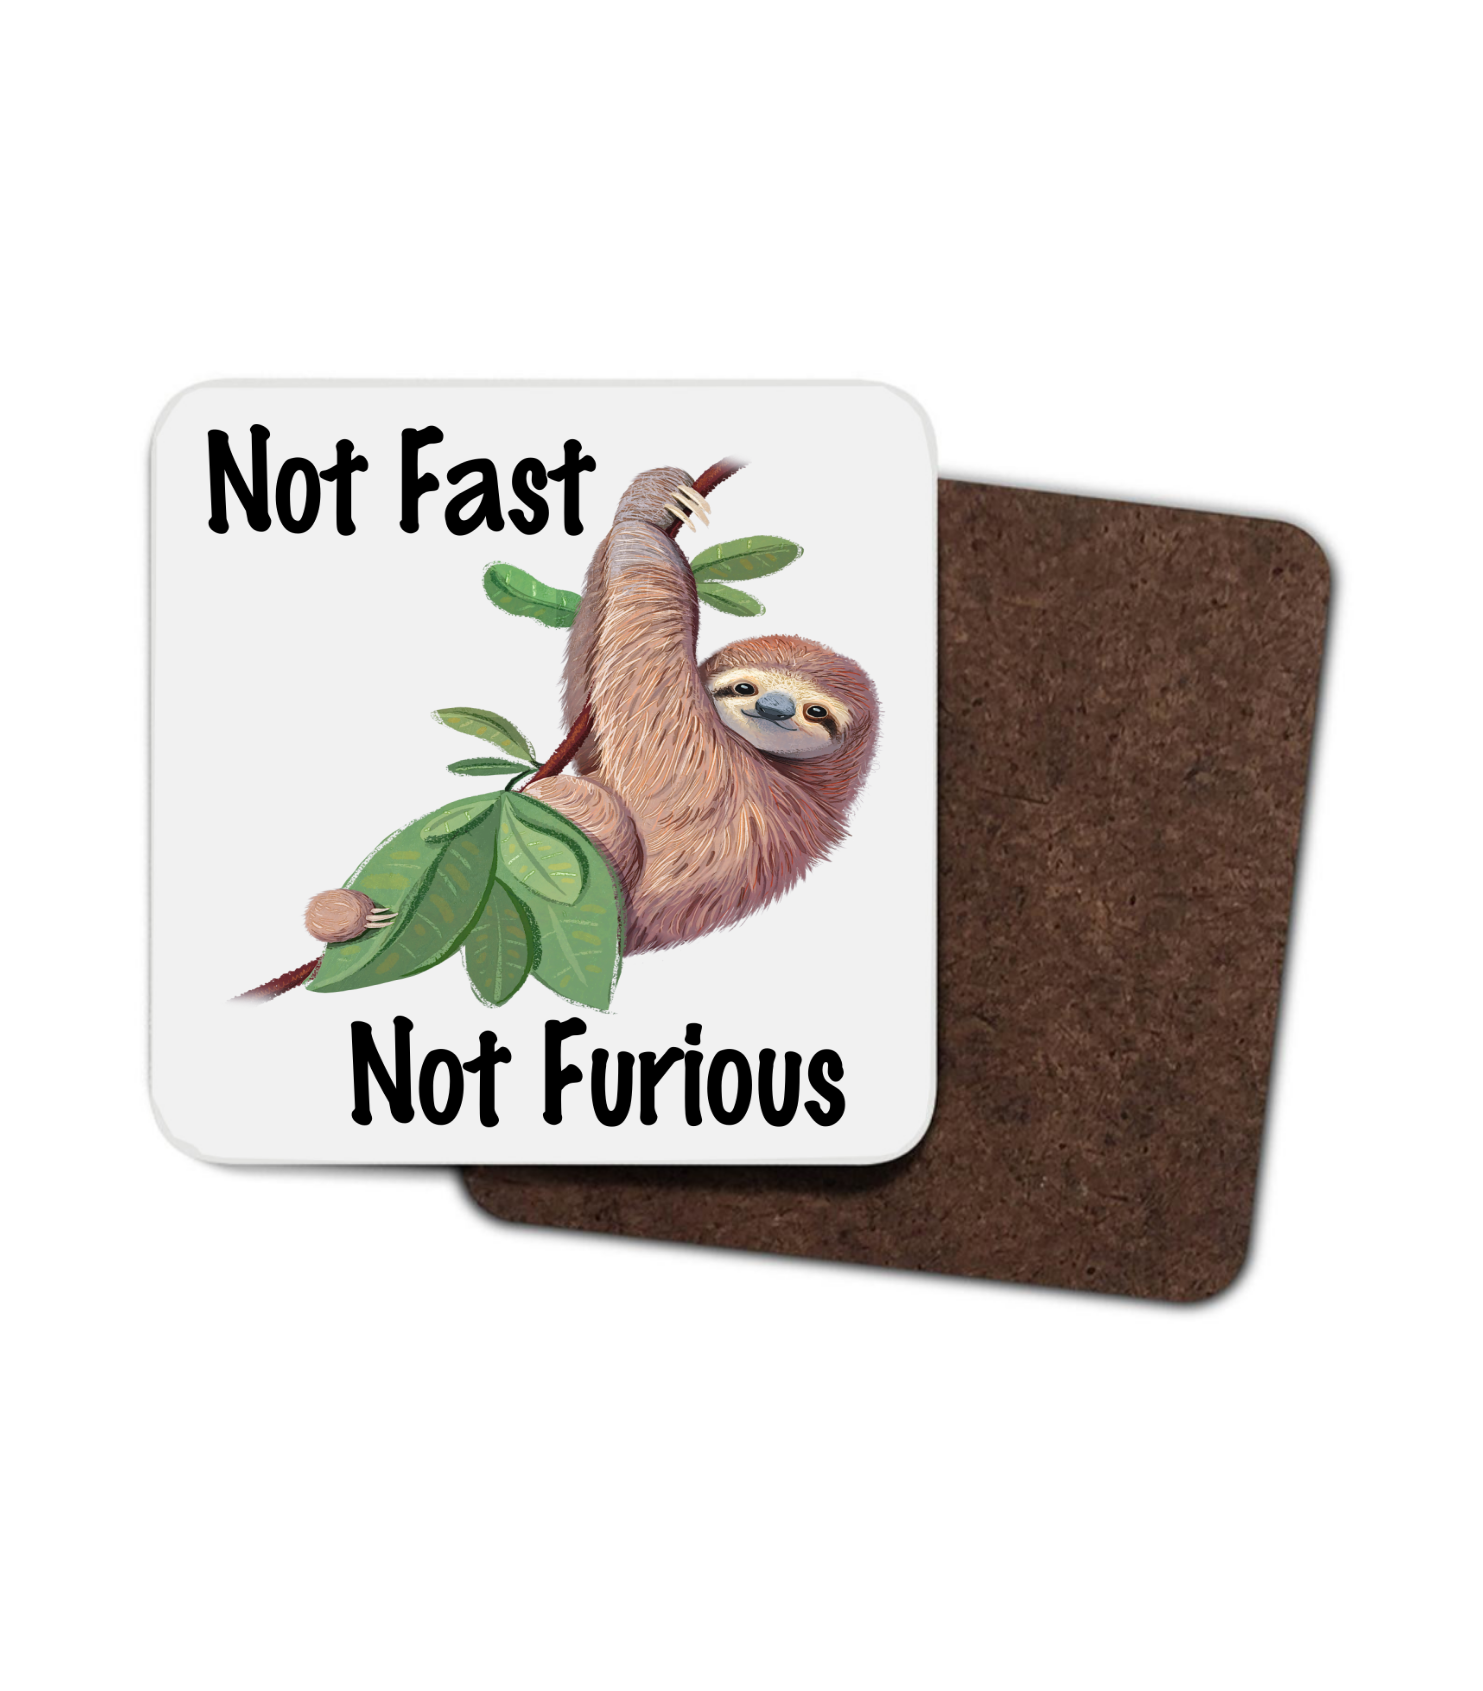 Sloth Hardboard Coaster - Not Fast, Not Furious, Funny Sloth